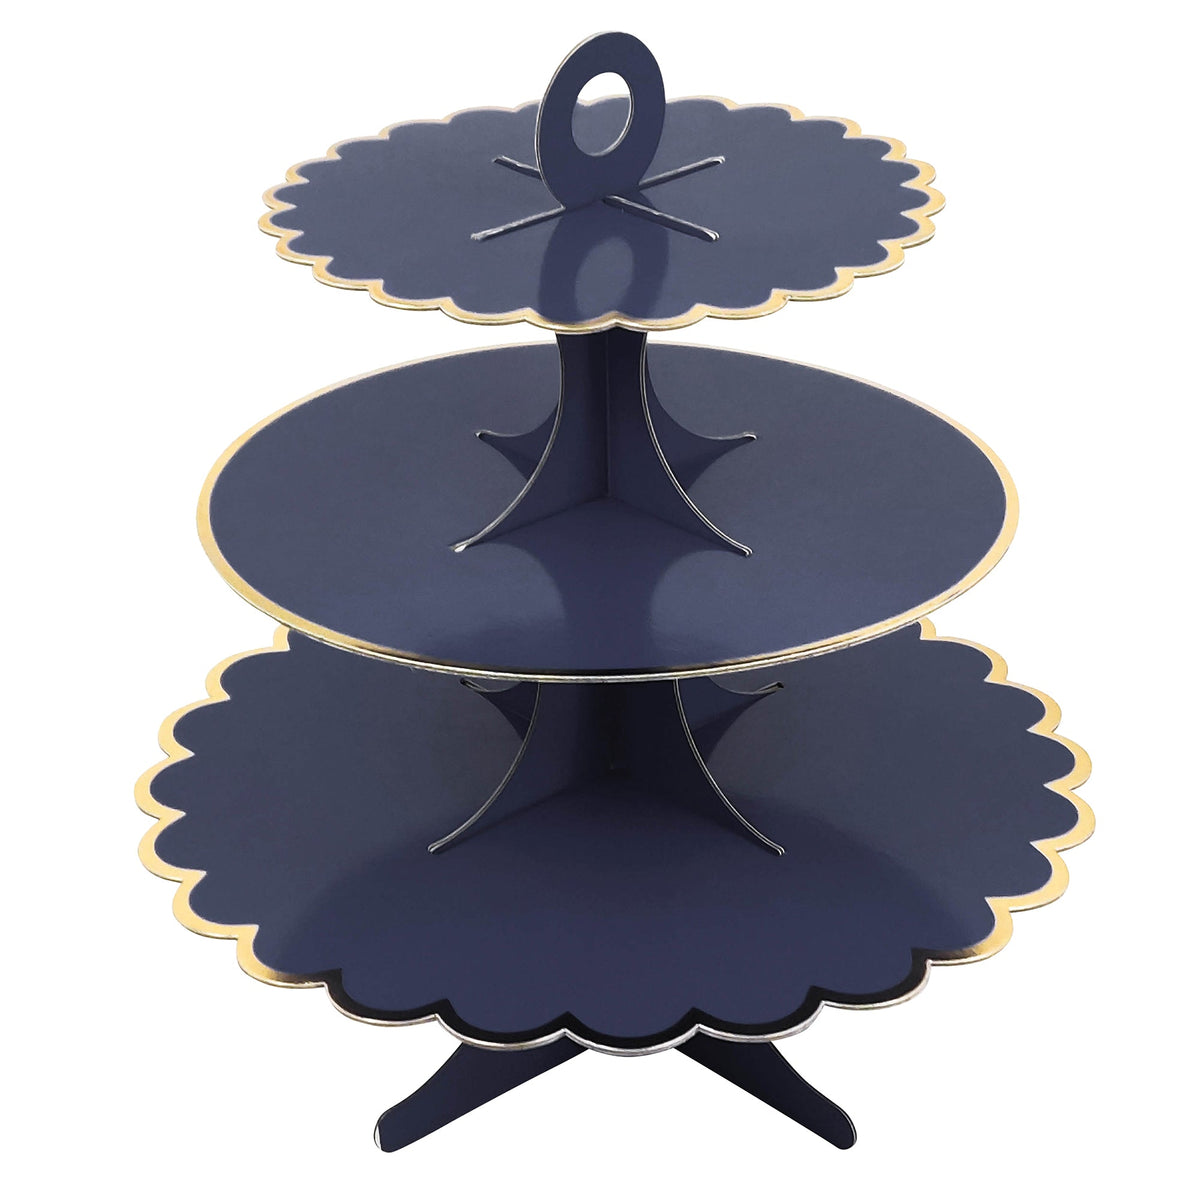 YIWU SANDY PAPER PRODUCTS CO., LTD Everyday Entertaining Navy Blue and Gold 3 Tiers Paper Cake Stand, 1 Count 810120711942